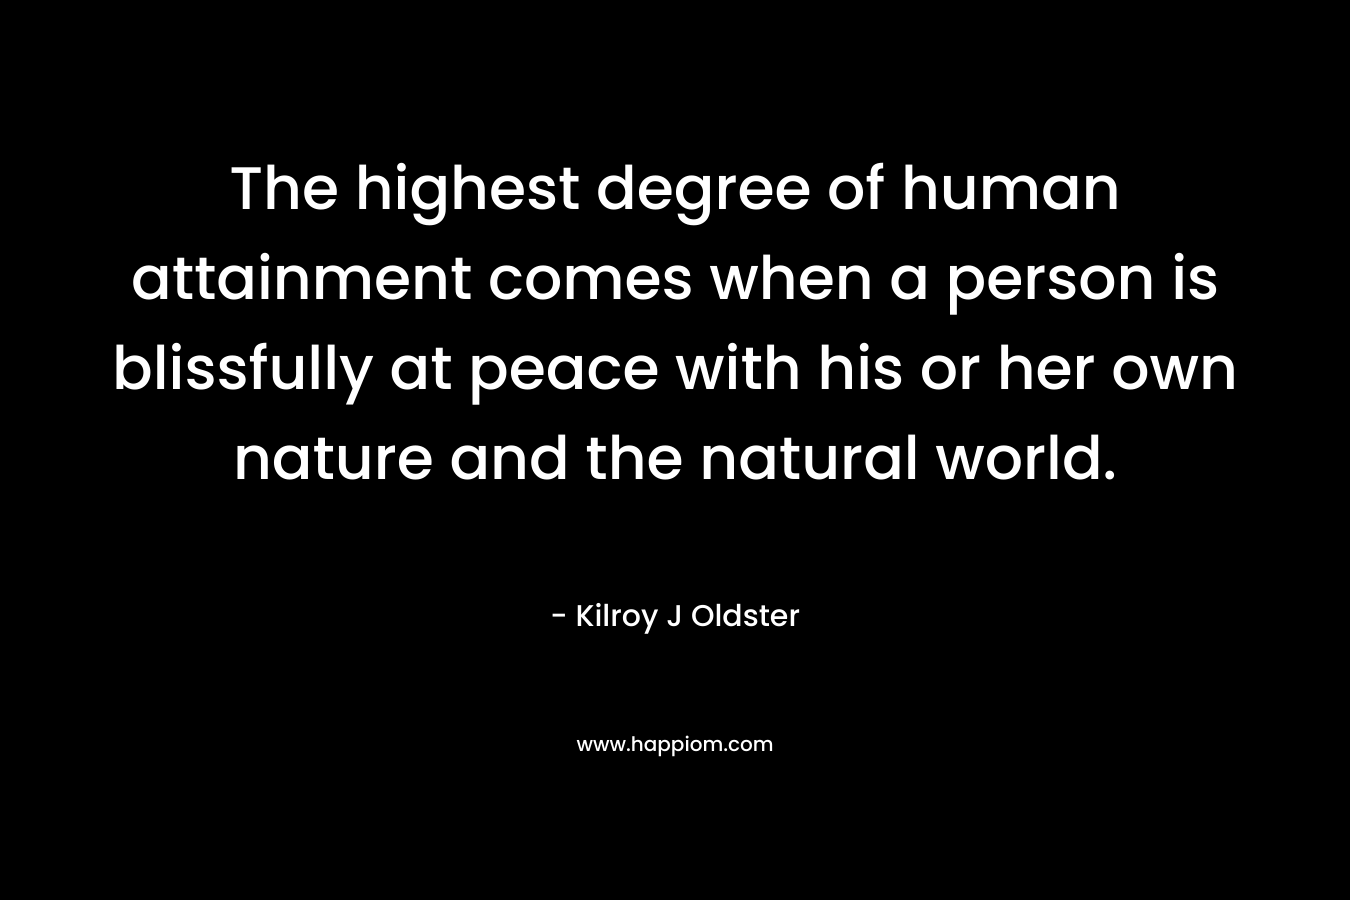 The highest degree of human attainment comes when a person is blissfully at peace with his or her own nature and the natural world. – Kilroy J Oldster